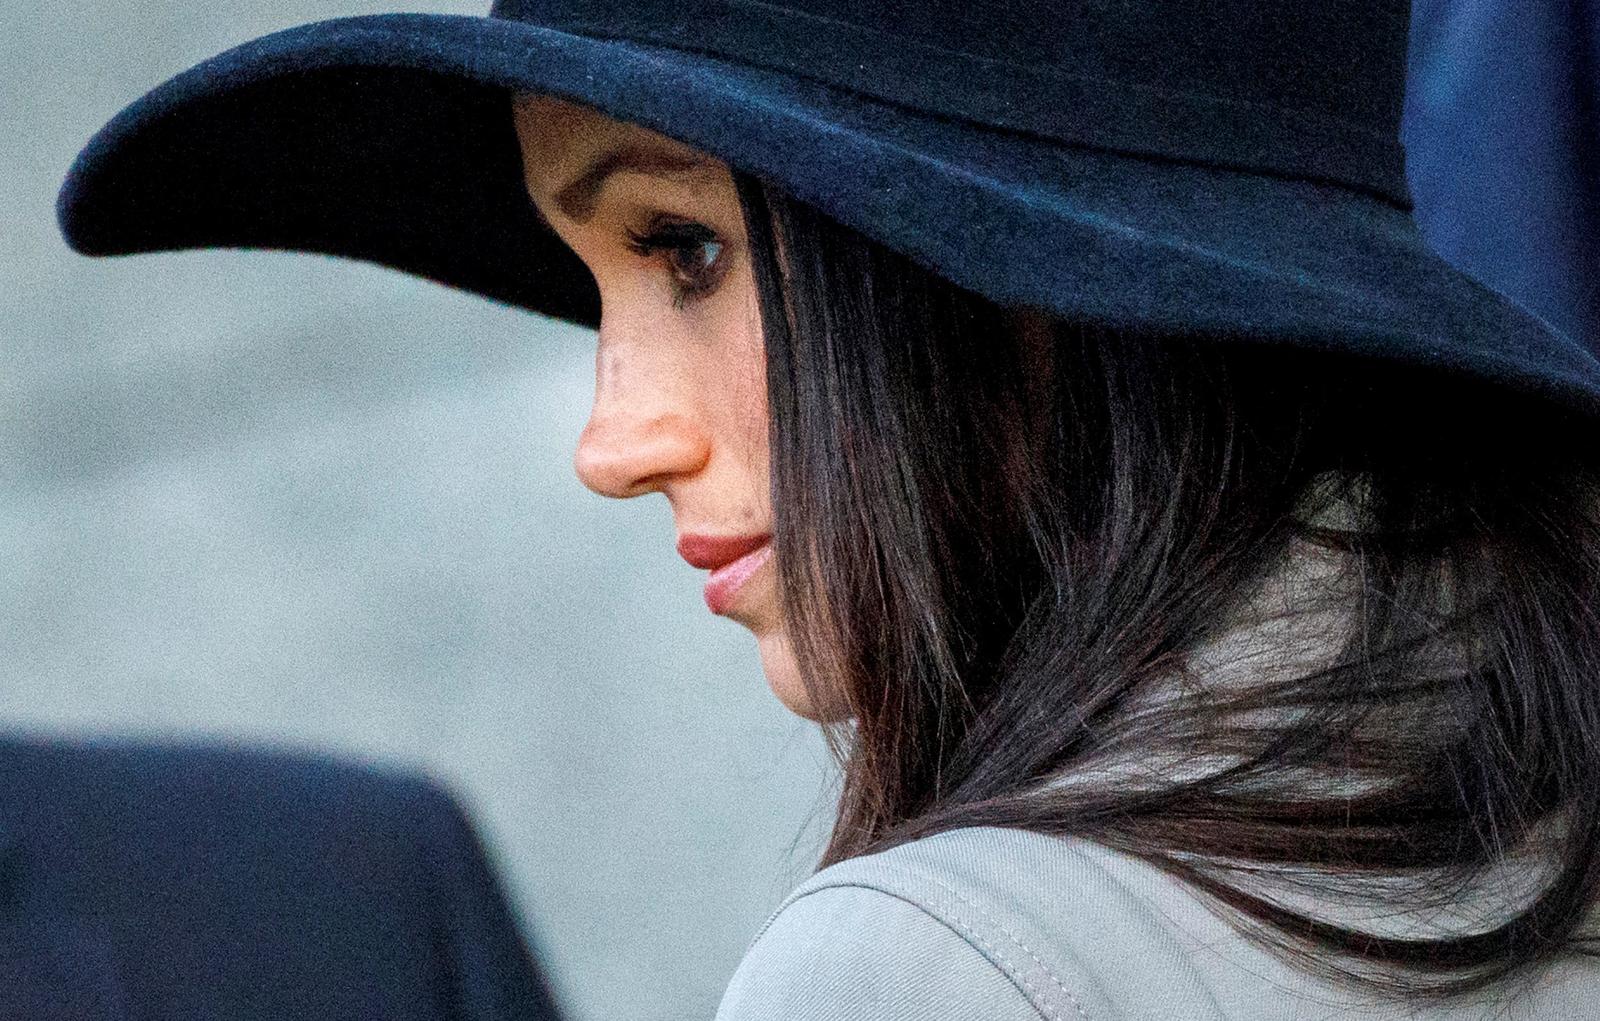 Meghan Markle, the fiancee of Britain’s Prince Harry, attends the Dawn Service at Wellington Arch to commemorate Anzac Day in London